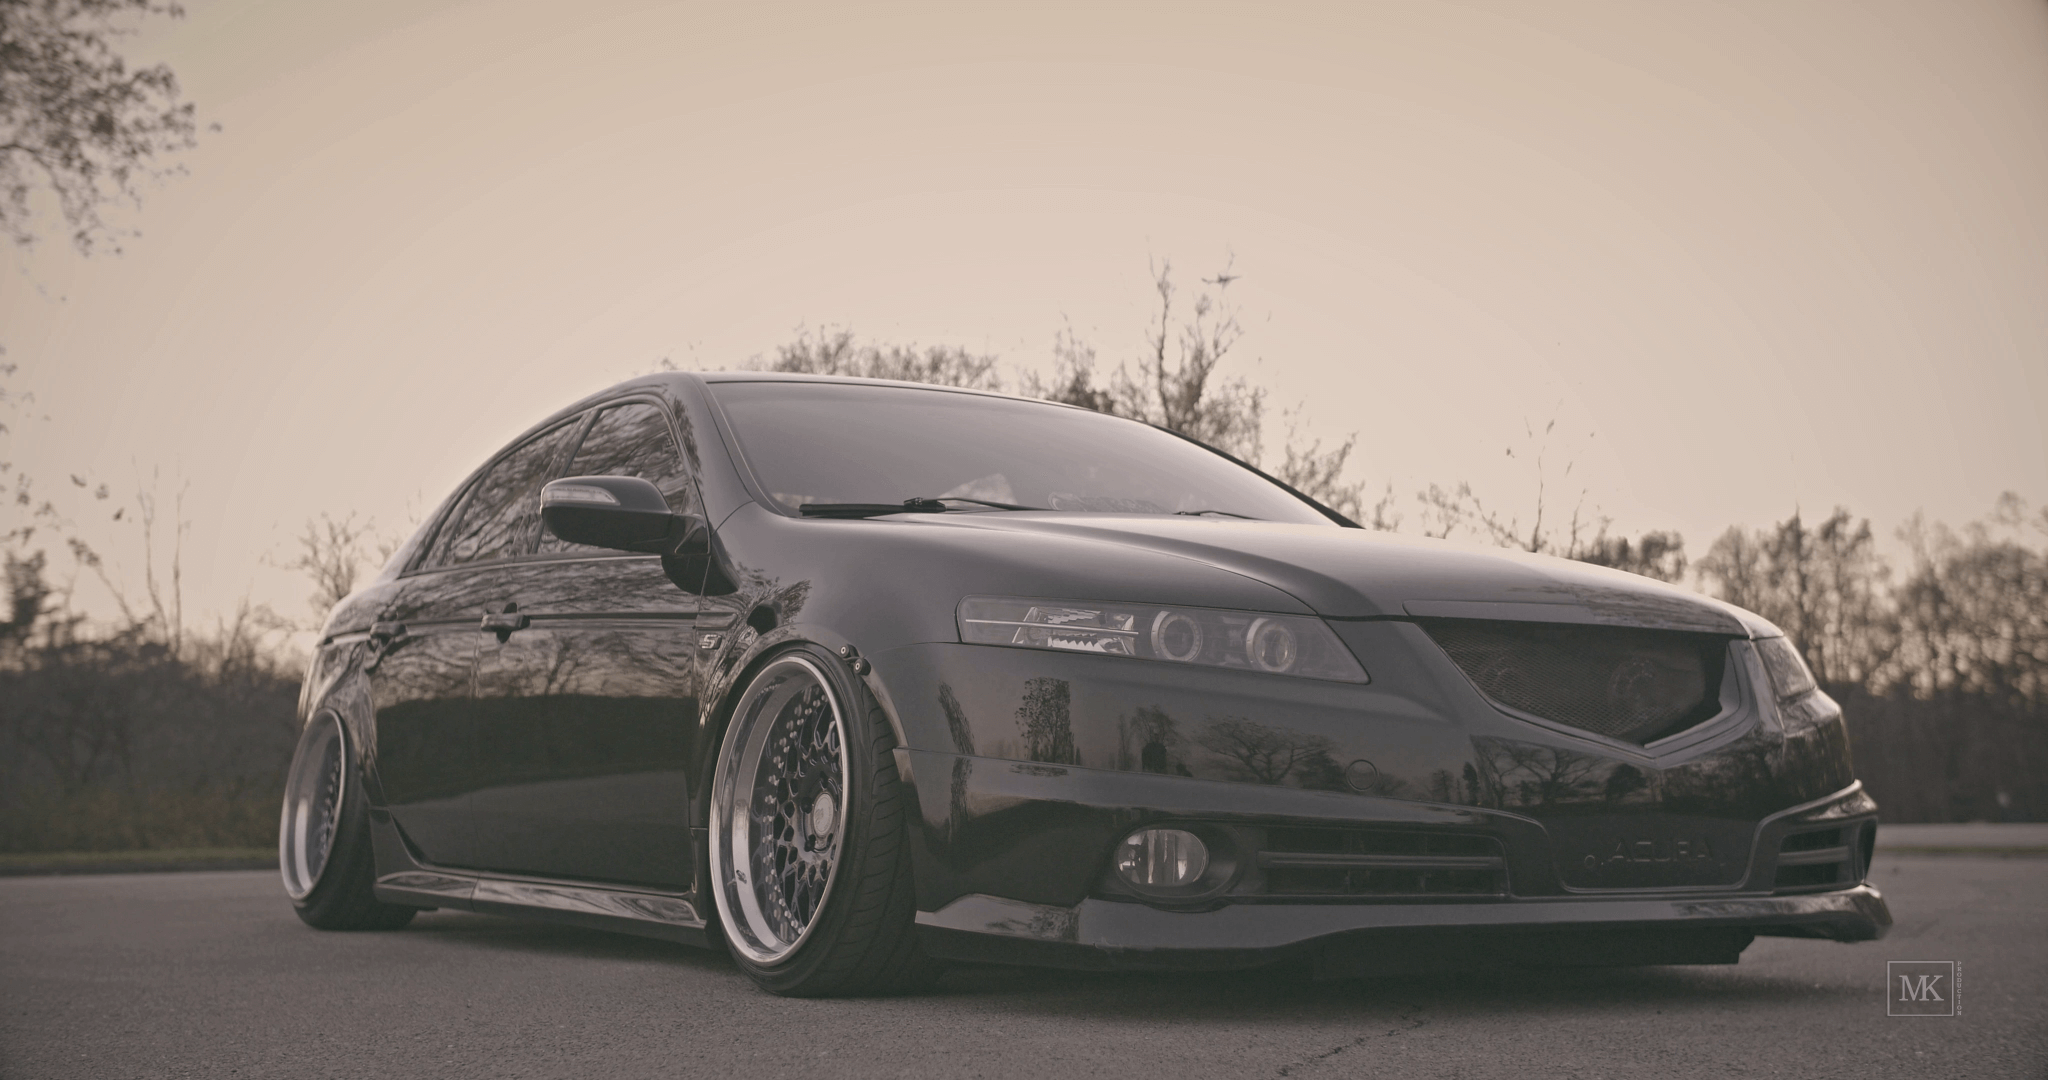 Mark’s Supercharged Acura TL Type S